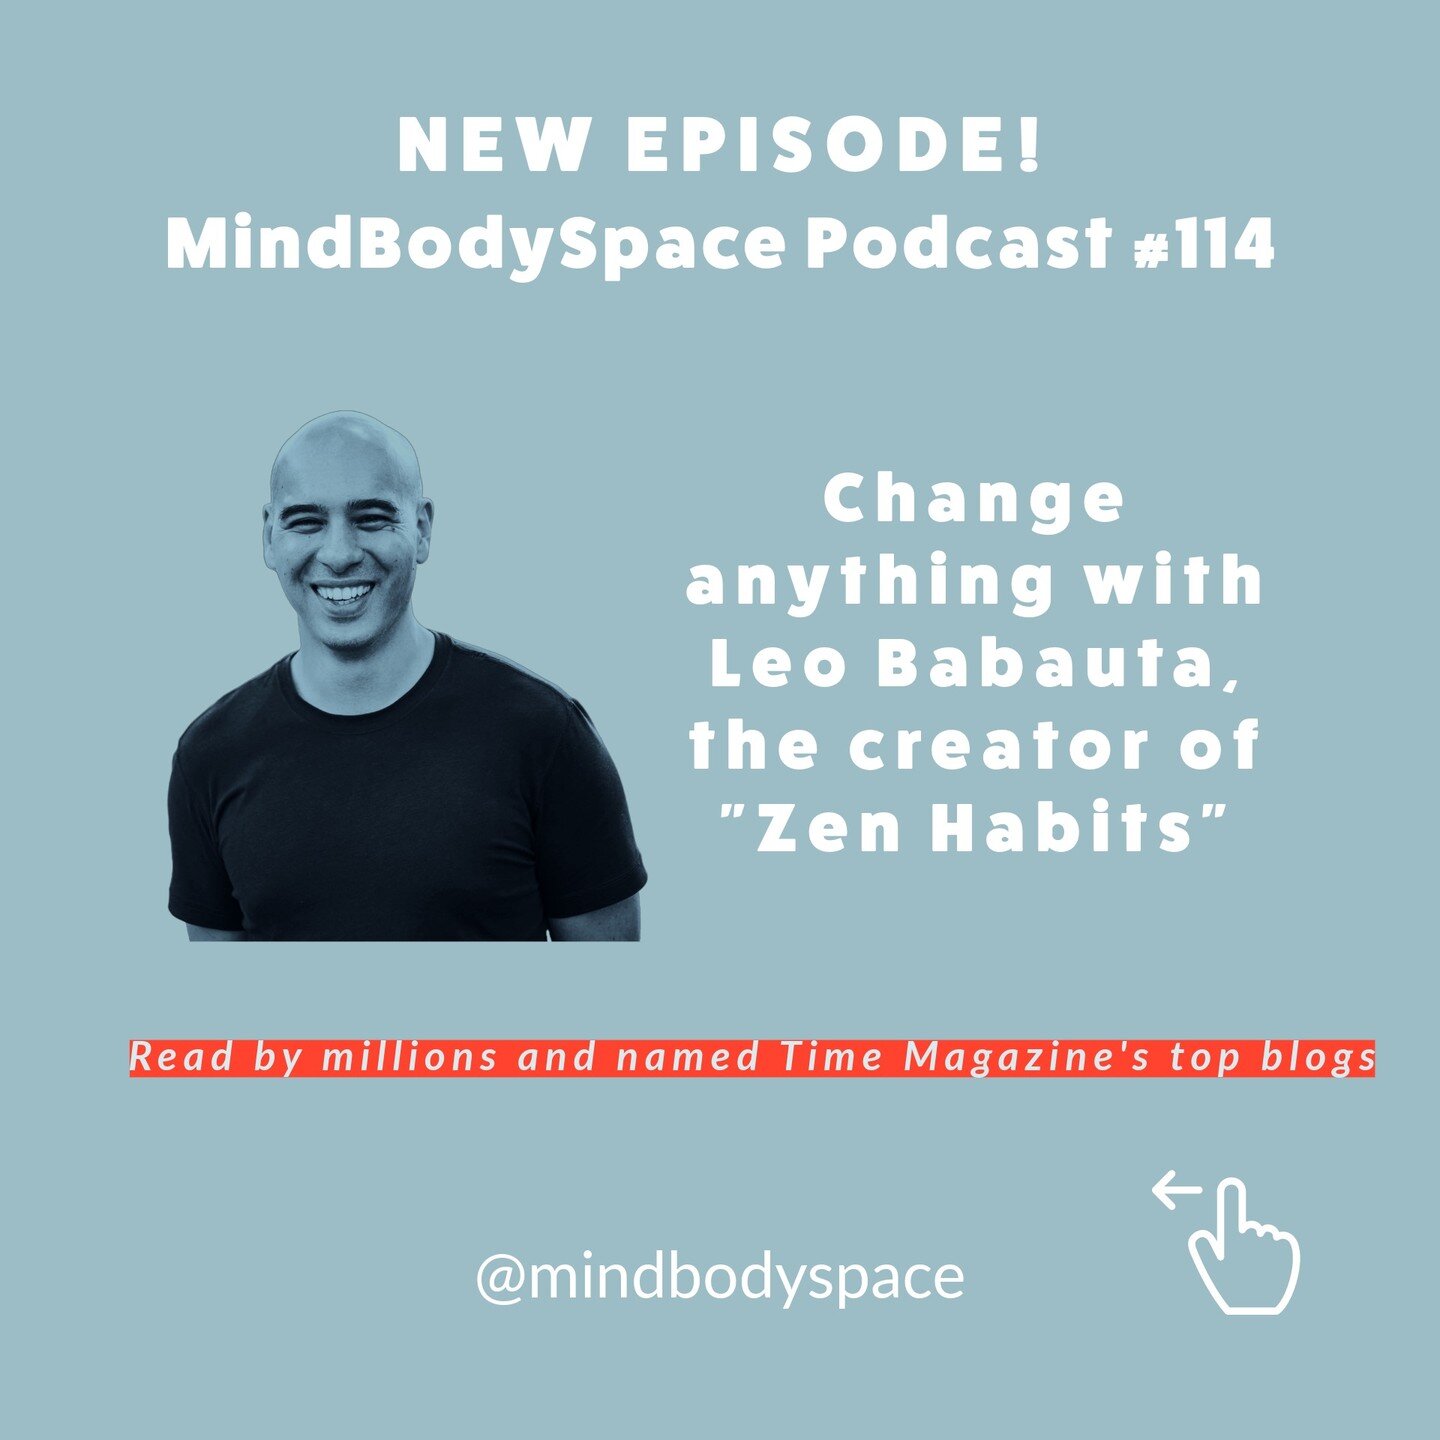 Dr. Juna interviews Leo Babauta, creator of the popular blog Zen Habits. Leo shares his inspiring personal story of overcoming smoking, debt, unhealthy habits, and more in 2005 by slowly making small changes. He gives actionable tips on creating last